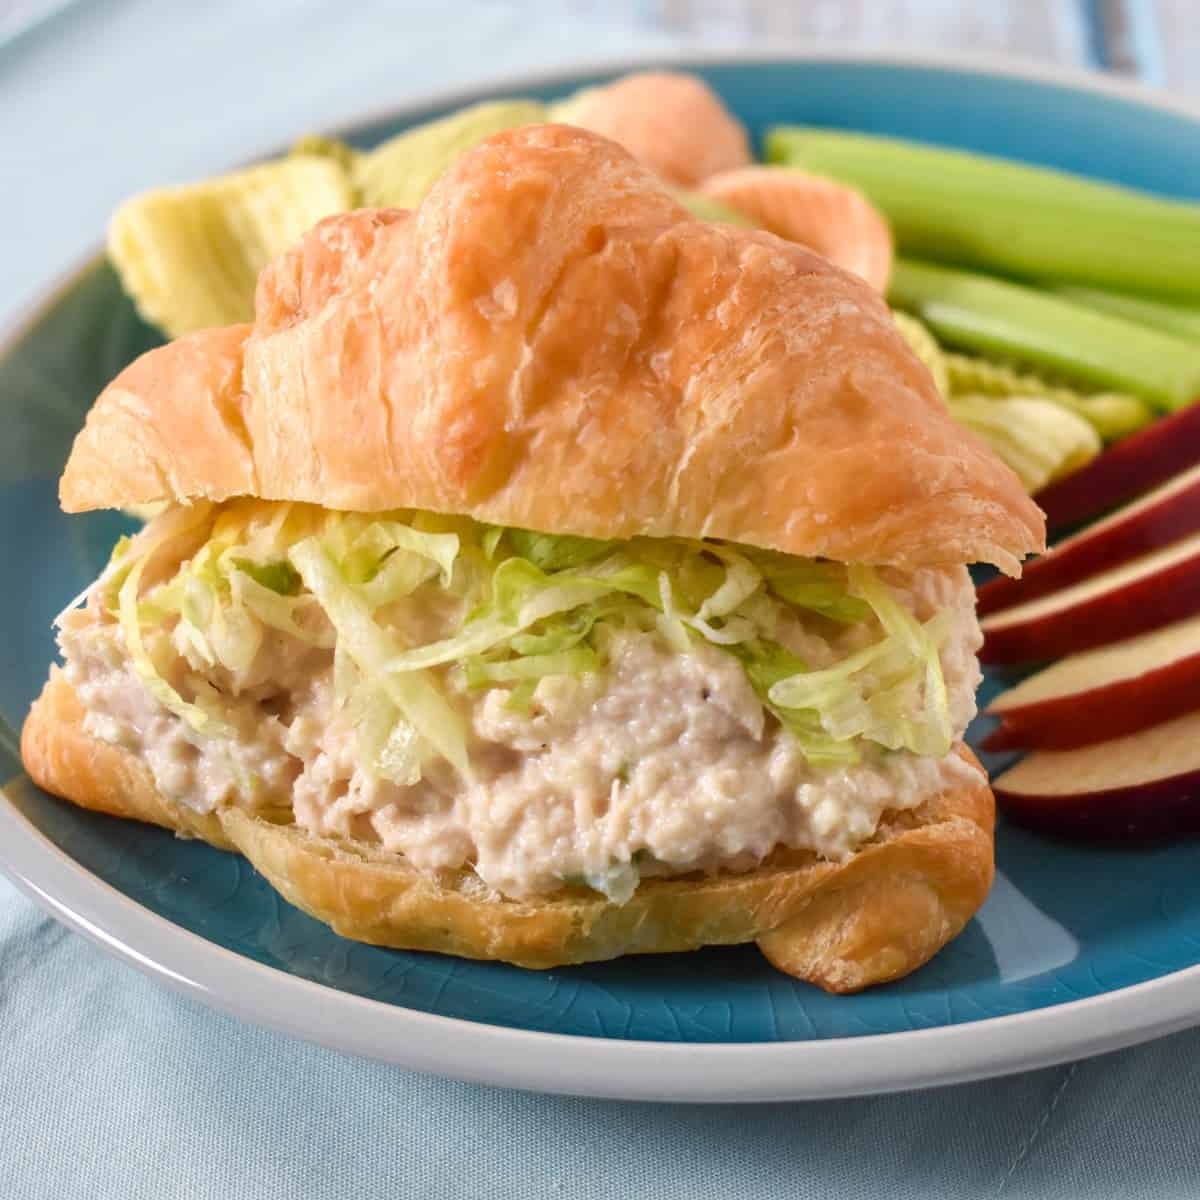 Tuna salad topped with shredded lettuce on a croissant with sliced apples and celery sticks on the side. The sandwich is served on a blue plate.